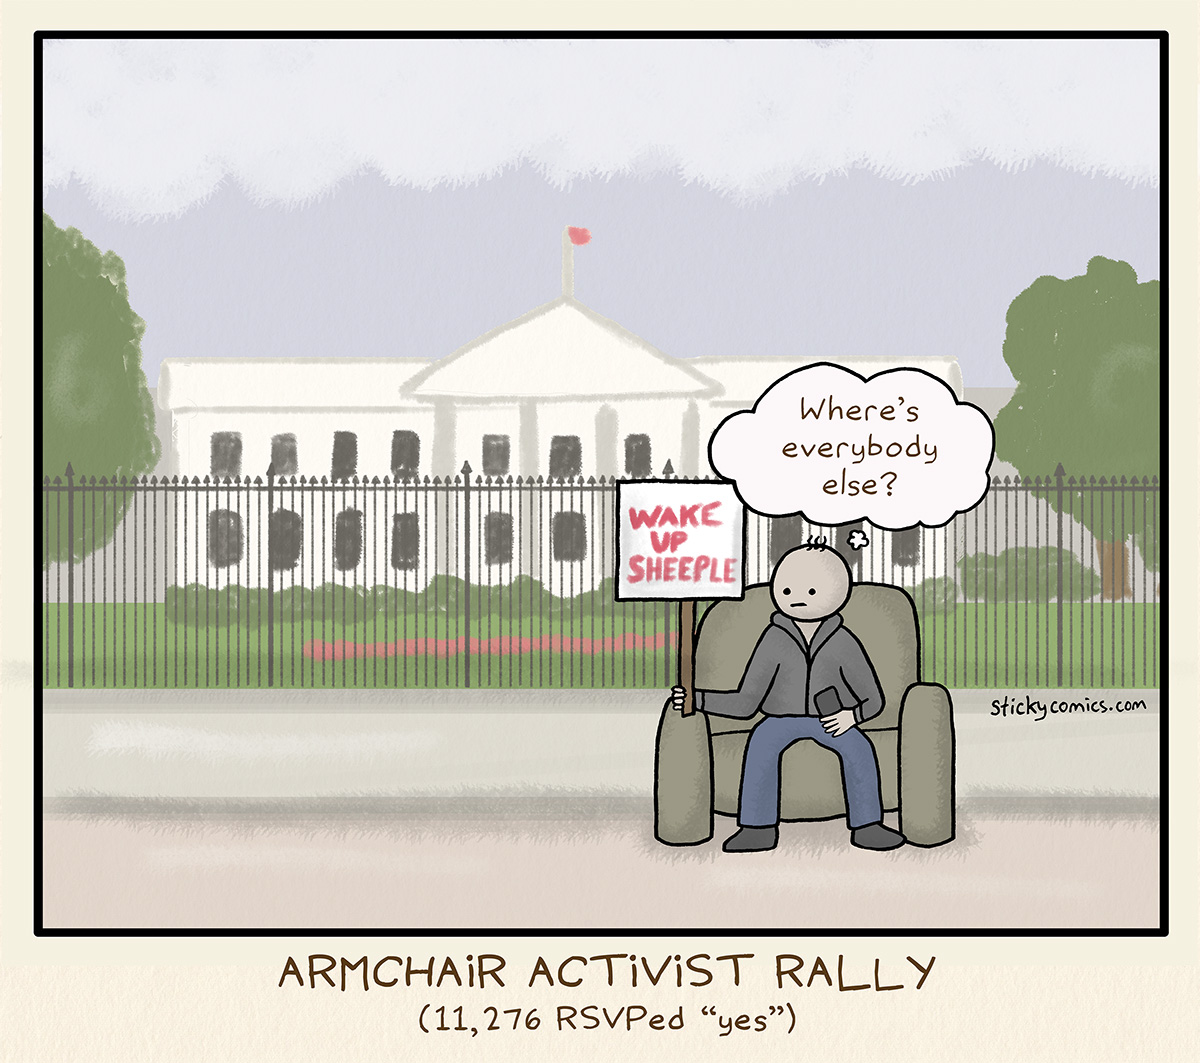 Man sitting in armchair in front of The White House, holding a sign that says "WAKE UP SHEEPLE." He's thinking, "Where's everybody else?" Caption: ARMCHAIR ACTIVIST RALLY. (11,276 RSVPed "yes")